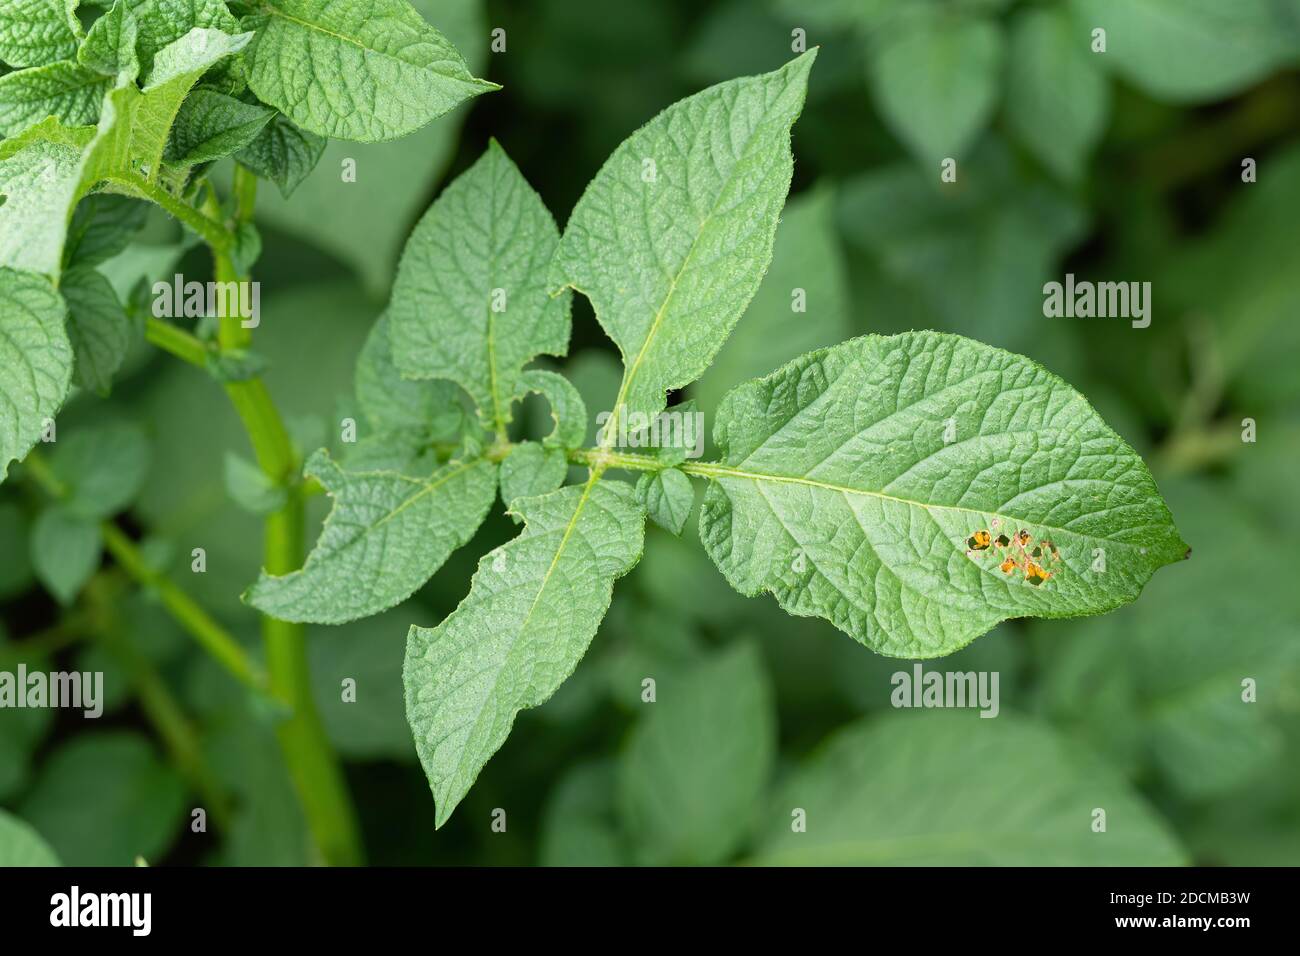 Leaf of potato plant with eggs of Colorado beetle (Leptinotarsa decemlineata) visible through holes. Close-up of insect pest causing huge damage to ha Stock Photo